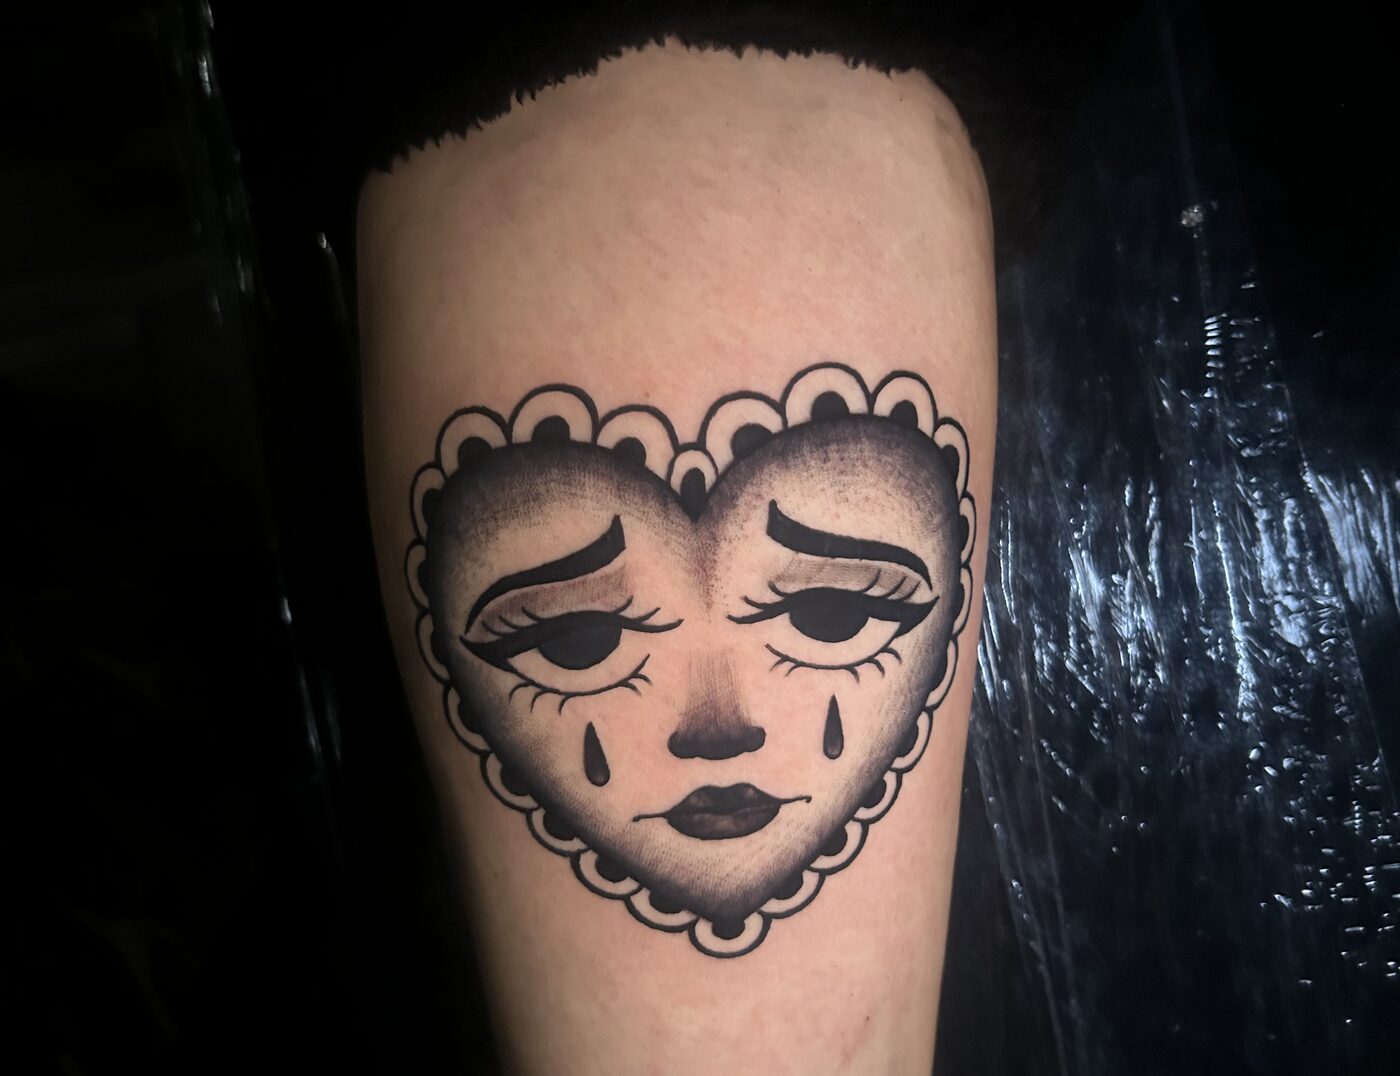 "Crying Face Heart" By Lyric TheArtist At Iron Palm Tattoos. The Crying Face Heart is used to symbolize a romantic relationship that no longer burns bright or feelings of betrayal in an enduring relationship.